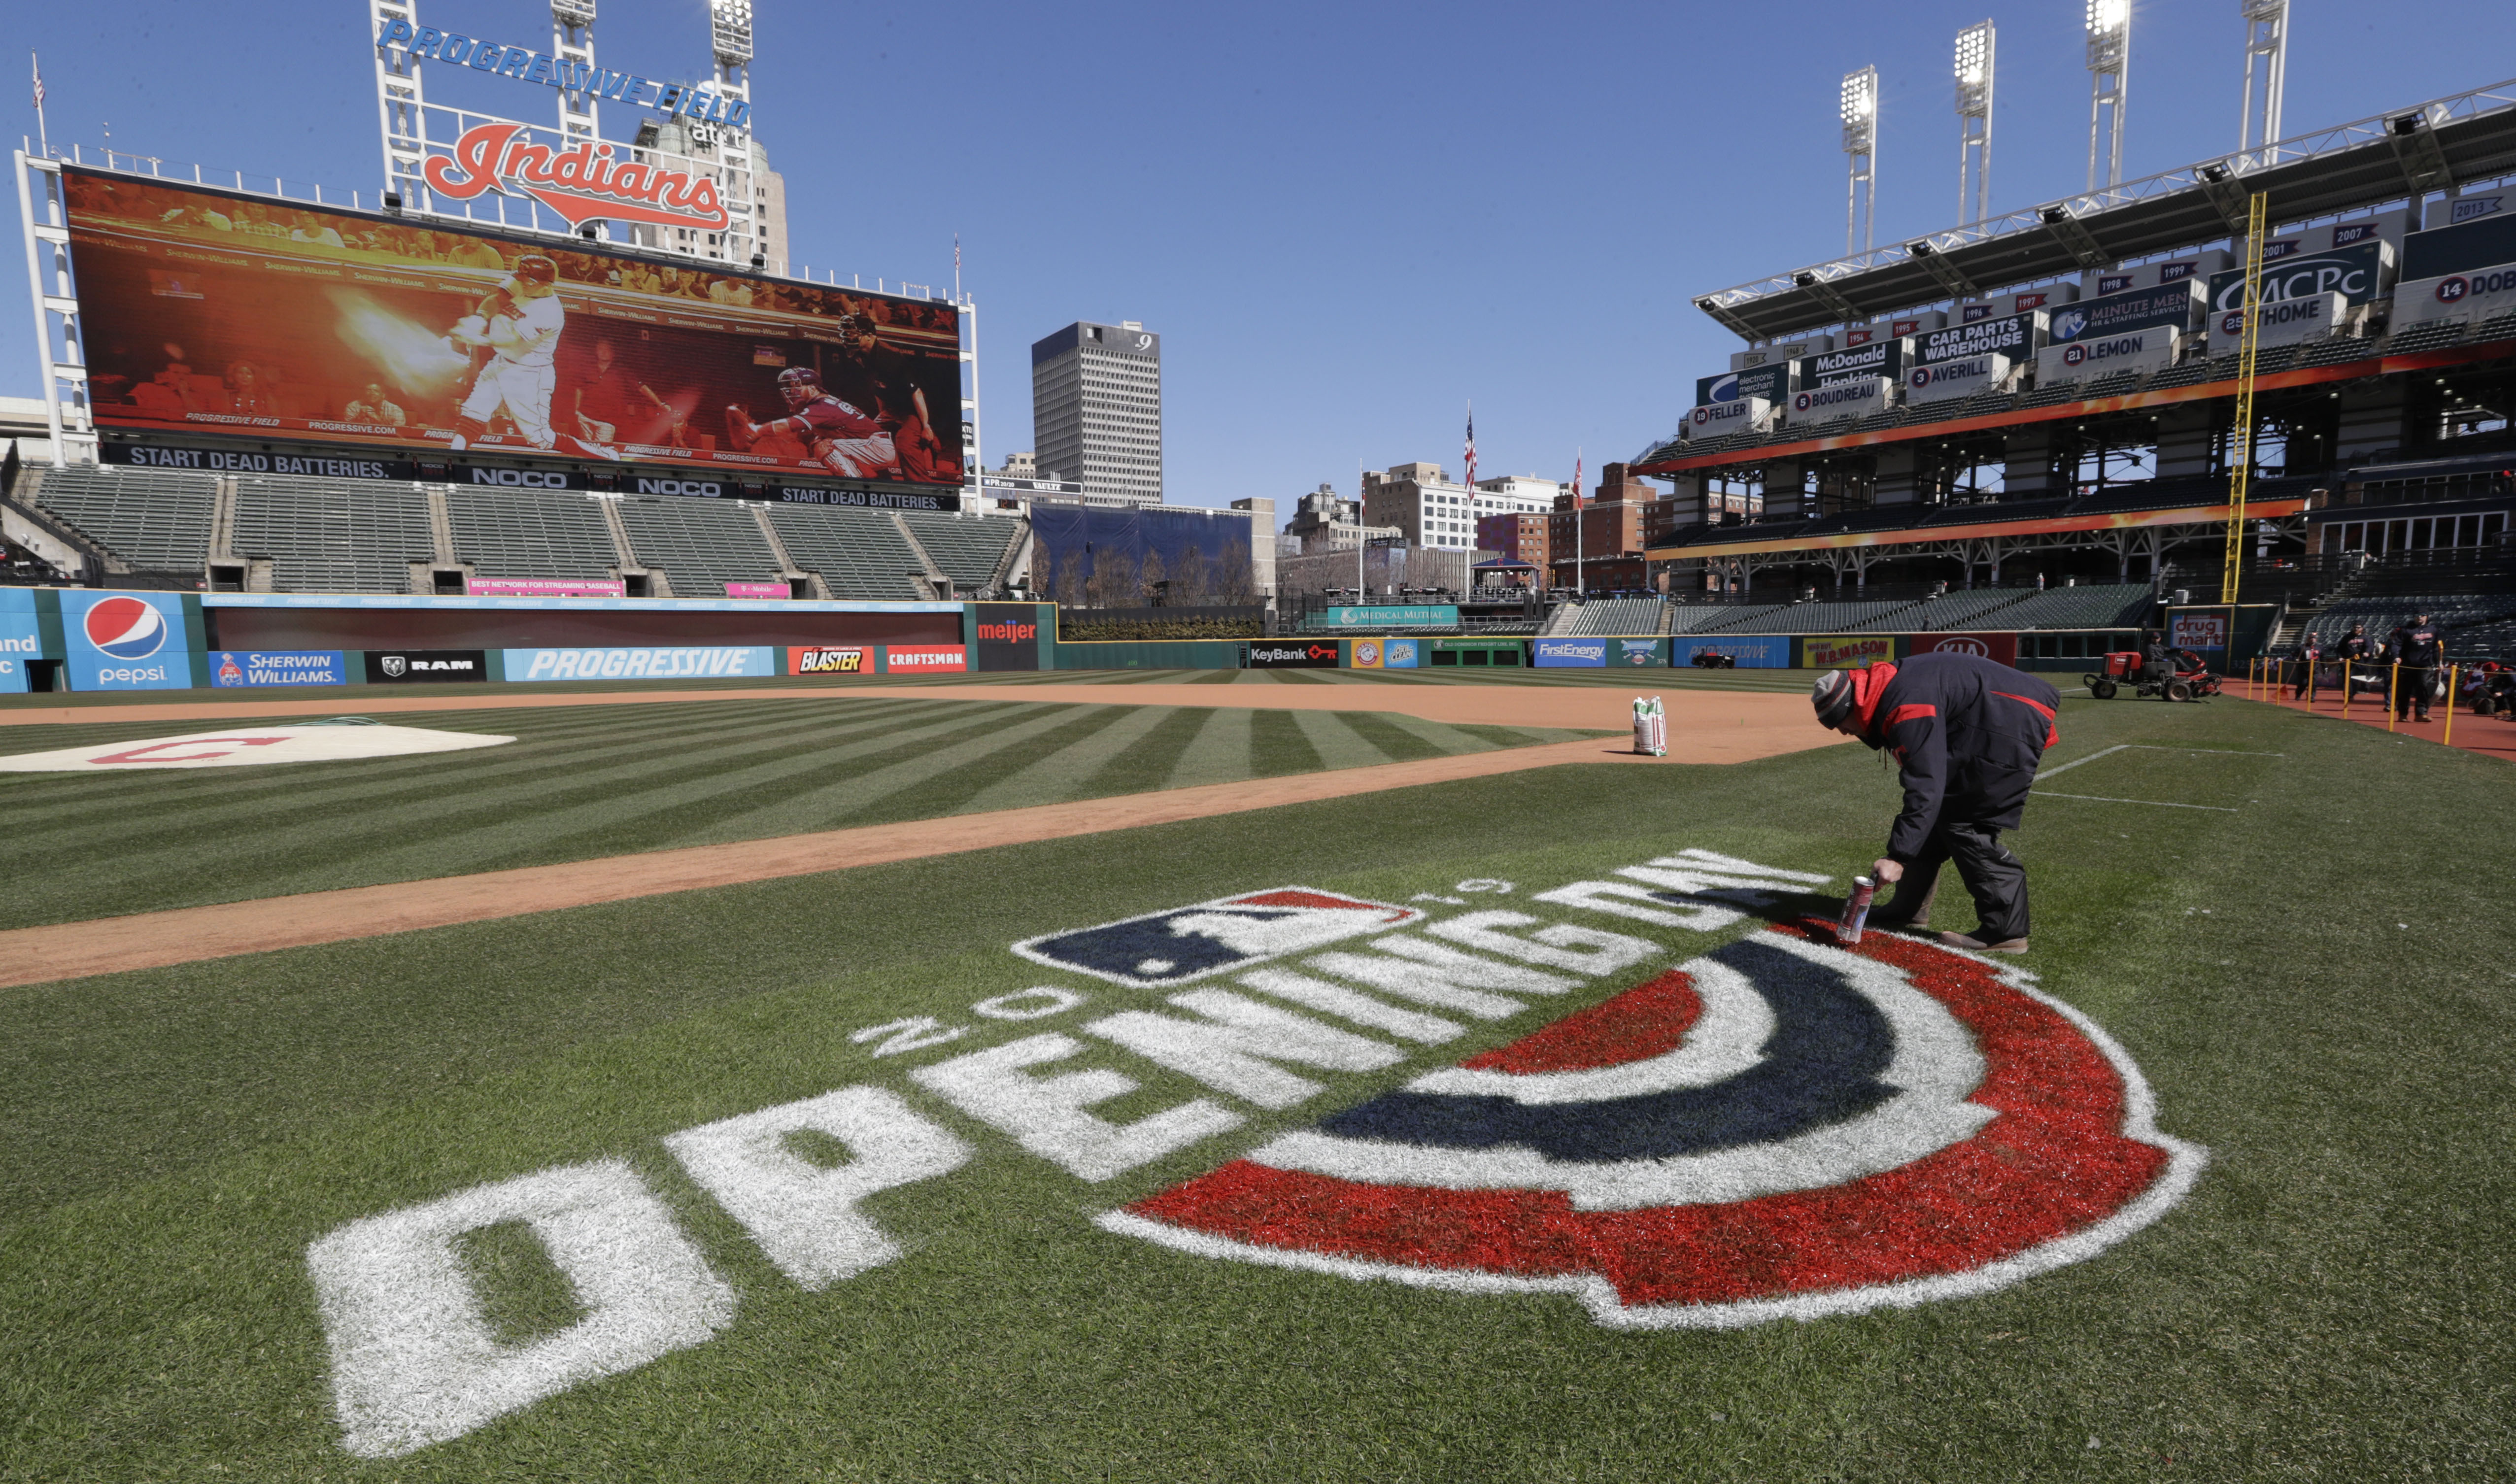 Cleveland Indians To Change Name After Years Of Protests – Deadline